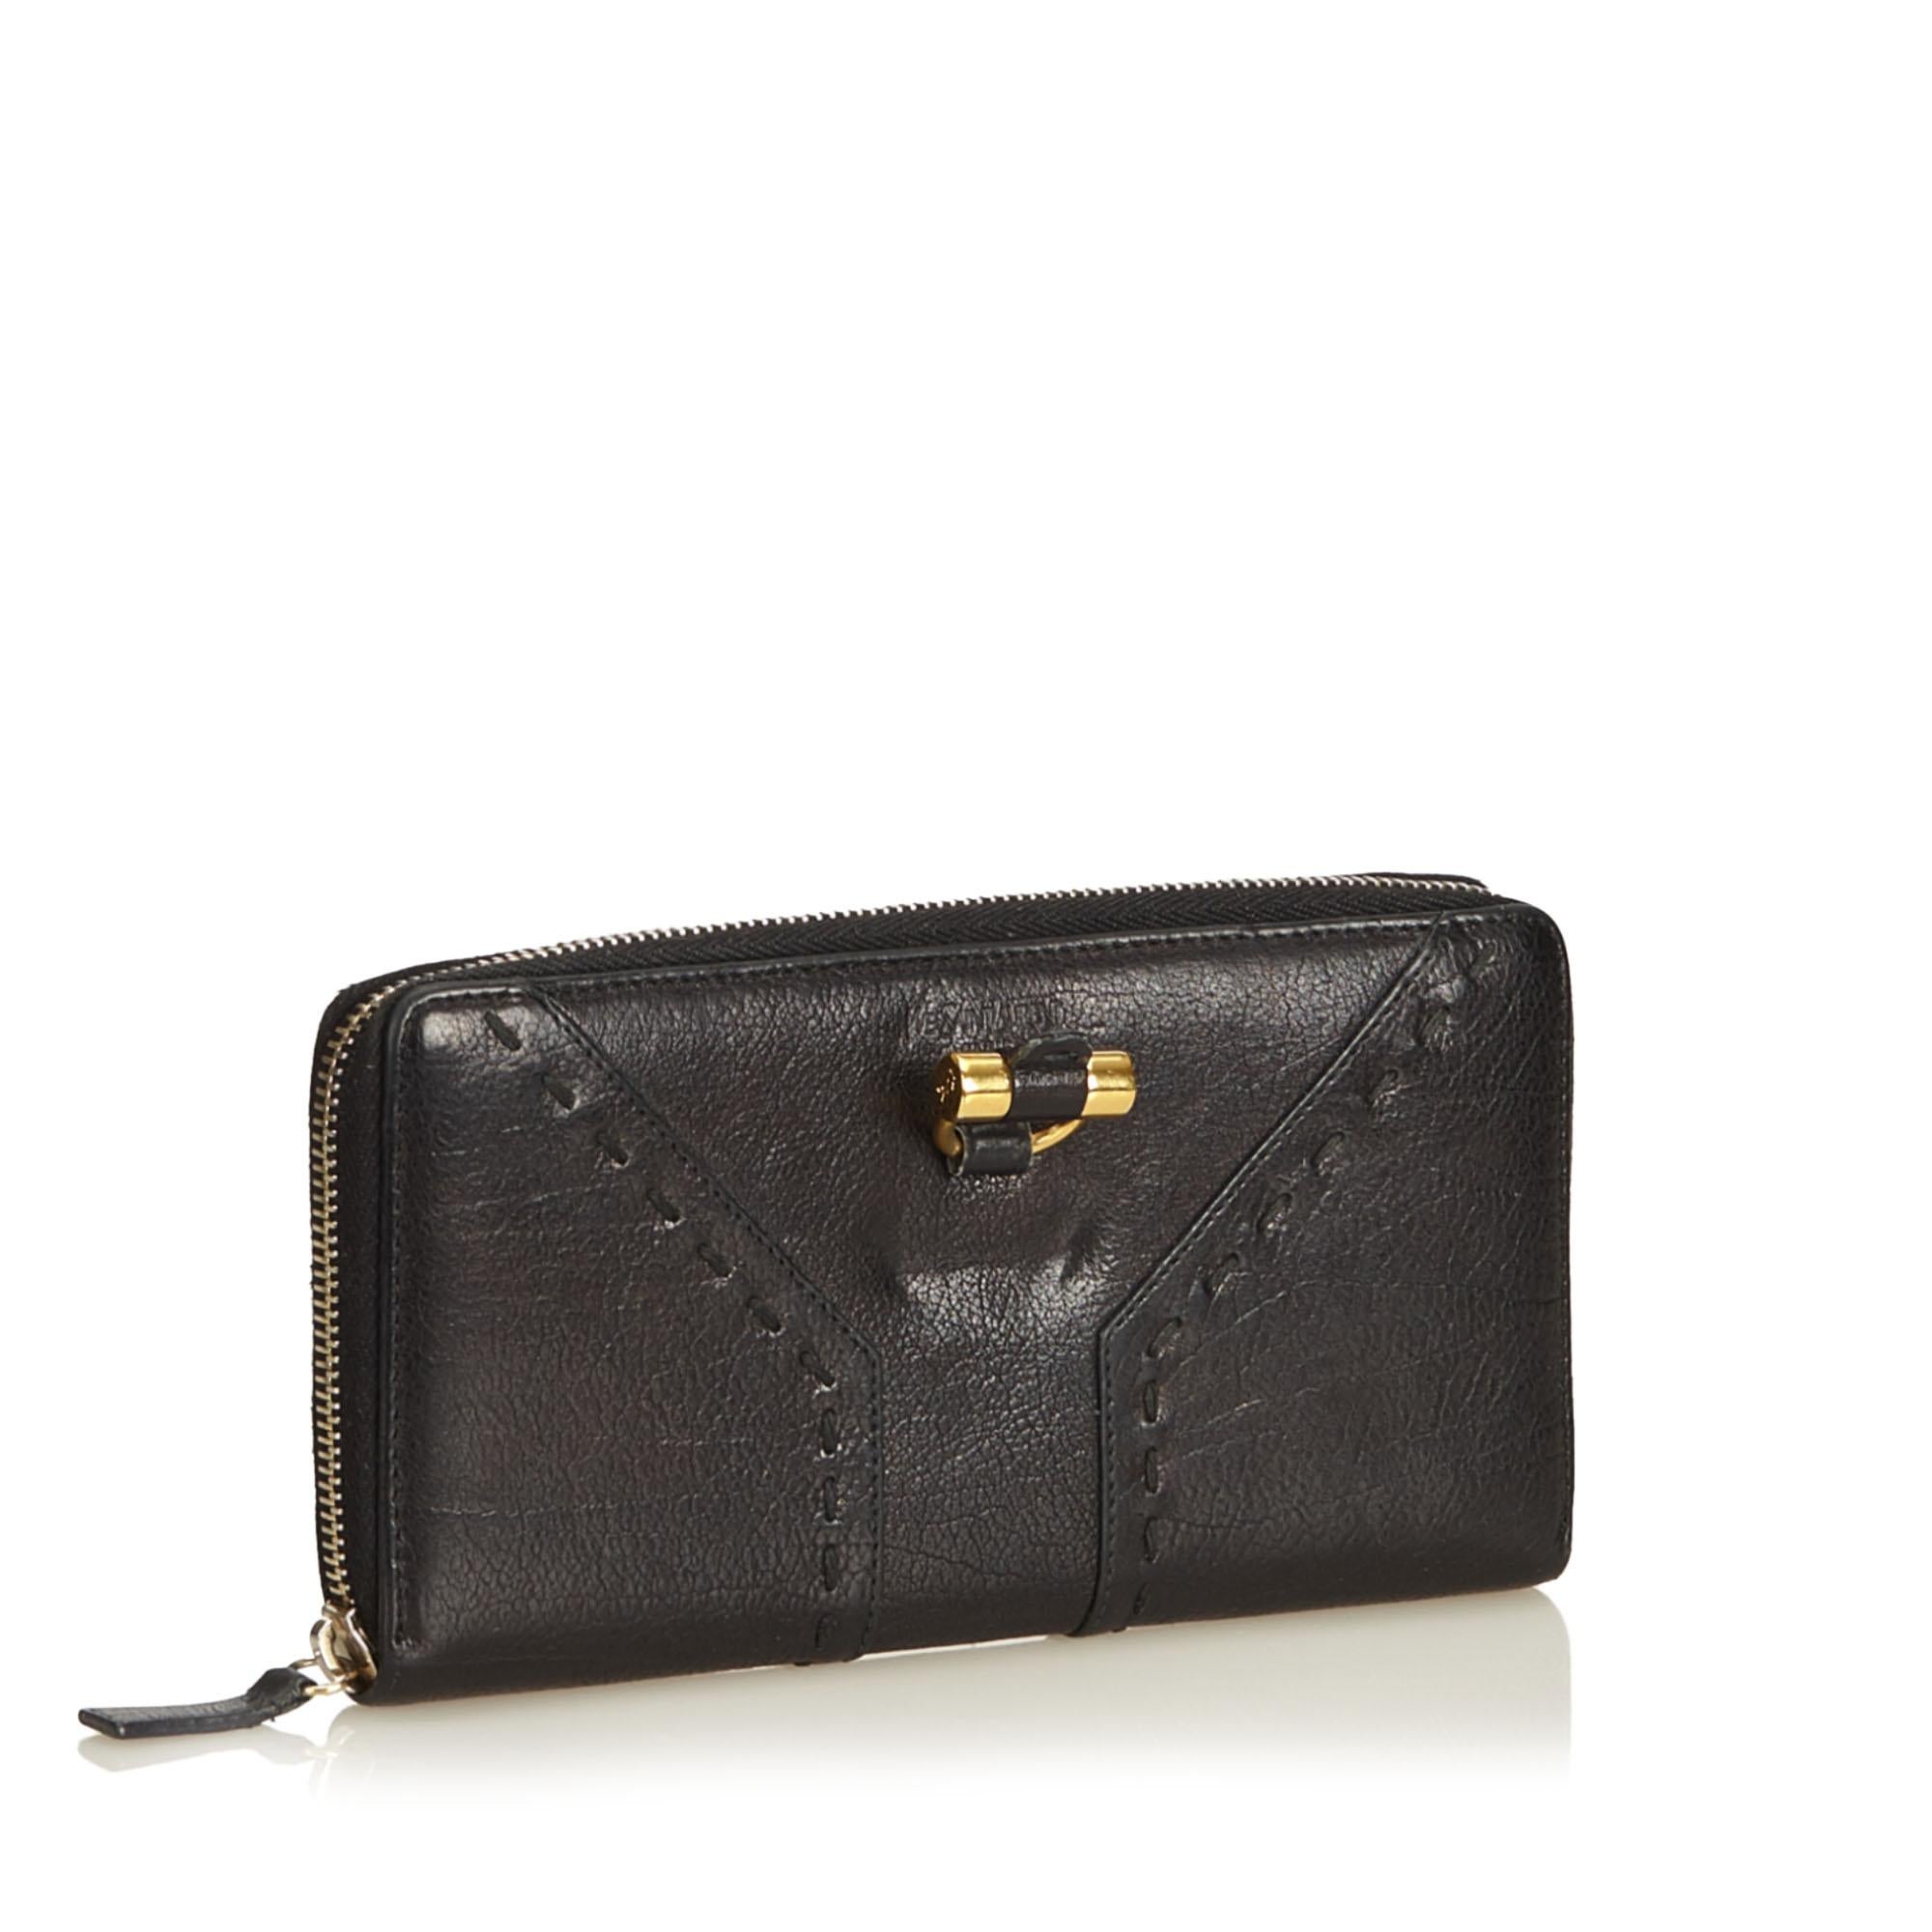 The Muse wallet features a leather body, gold-tone hardware, a zip around closure, an interior zip compartment, and interior slip pockets. It carries as B+ condition rating.

Inclusions: 
This item does not come with inclusions.

Dimensions:
Length: